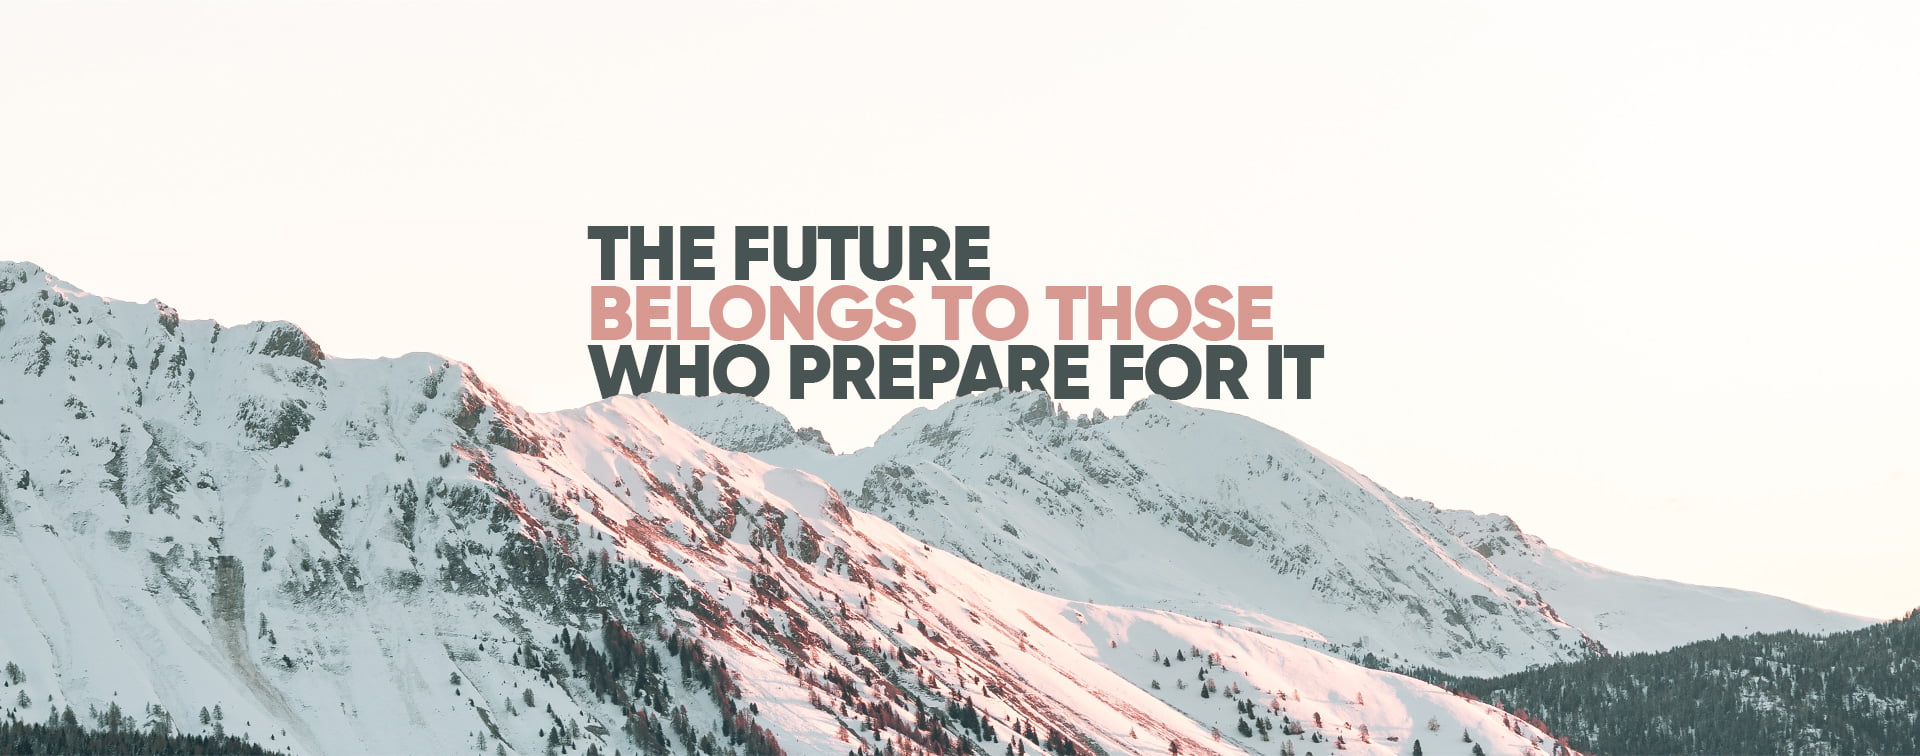 the future belongs to those who prepare for it